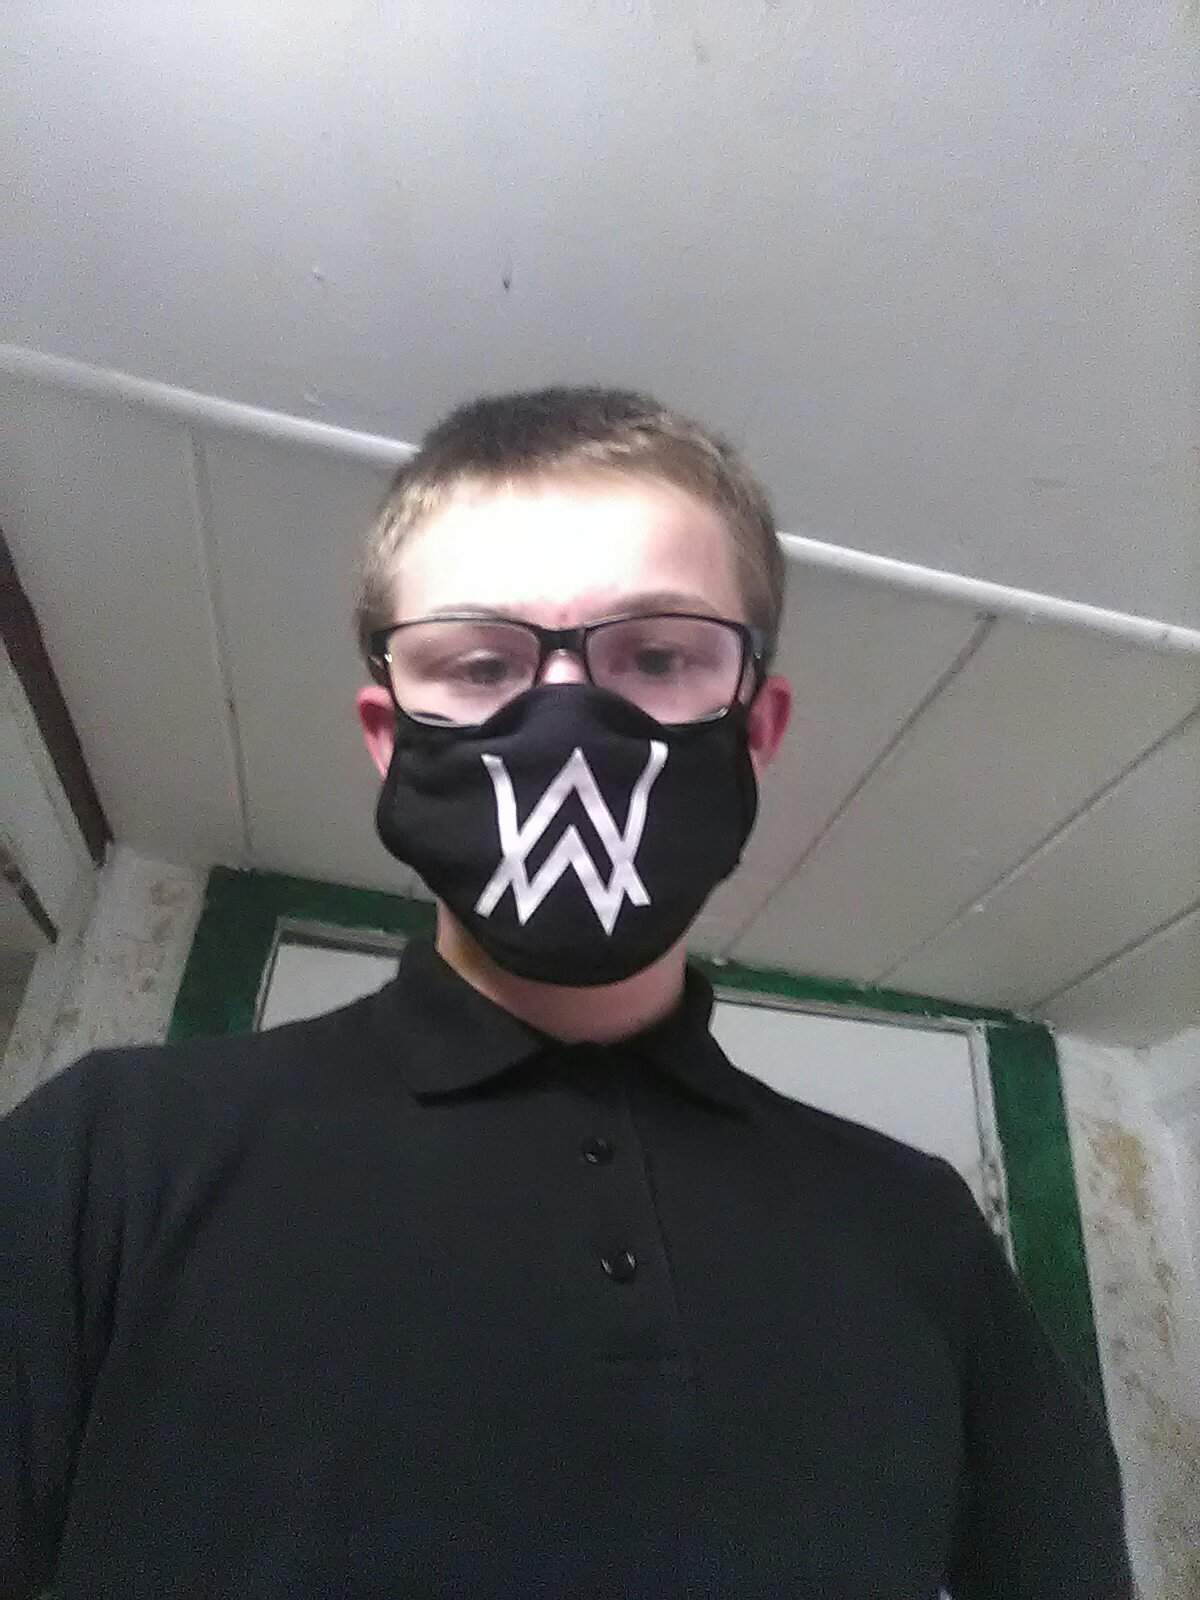 I Only Wear The Mask Because Im Hiding My Face Because People Say My Face Is Ugly And 2nd Is Because Im A Walker Im Tired Of Being Bullied All The Time